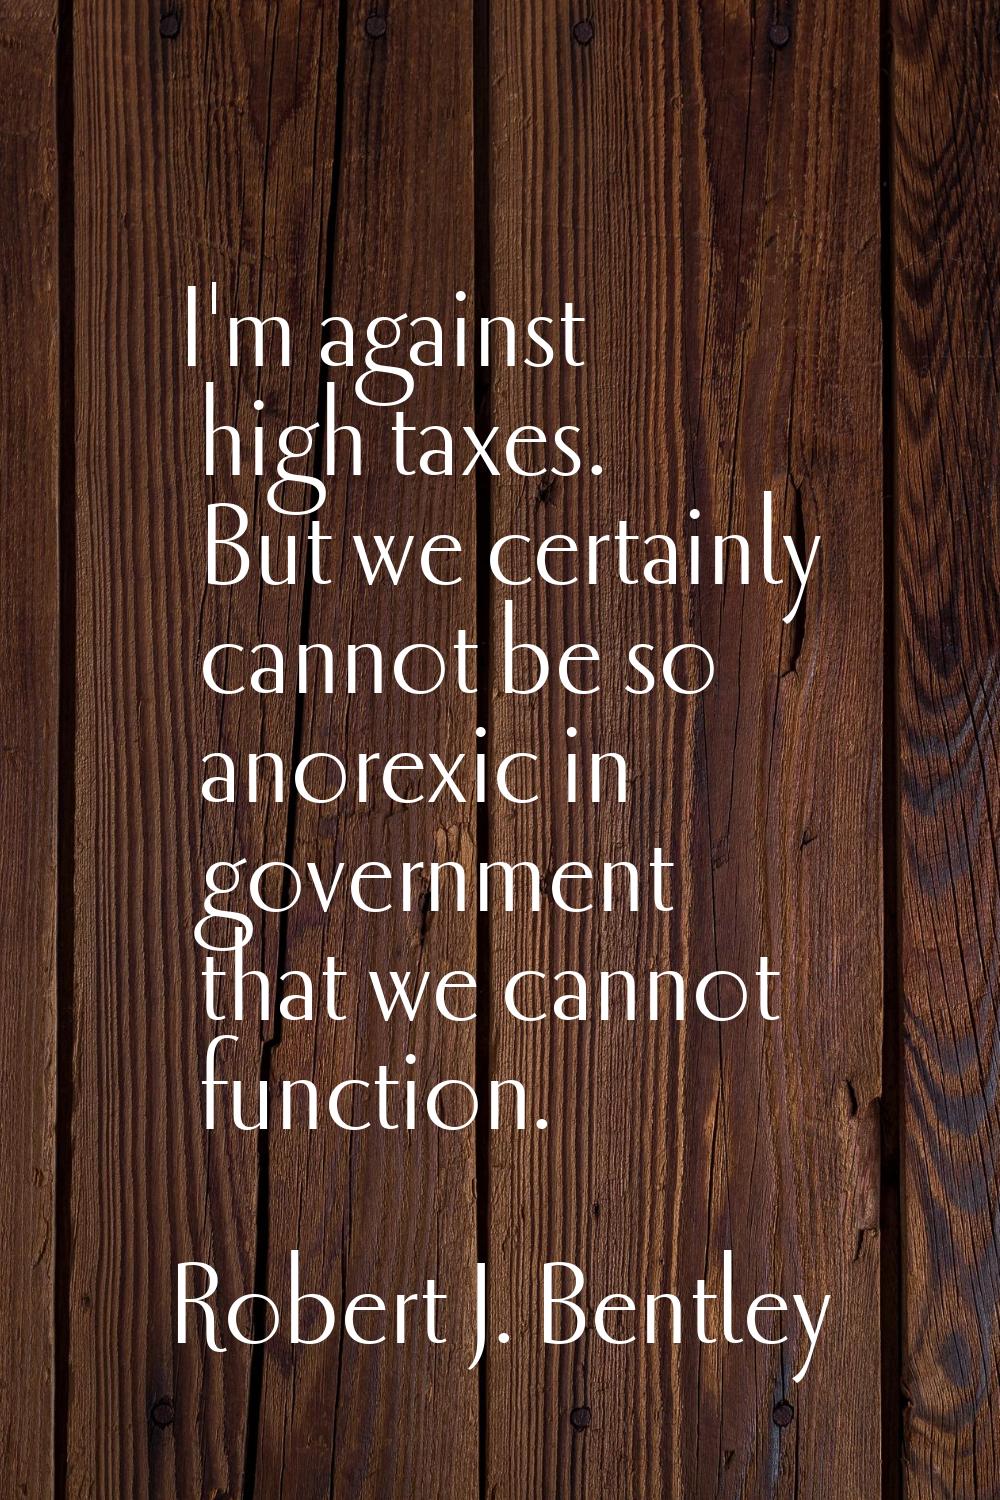 I'm against high taxes. But we certainly cannot be so anorexic in government that we cannot functio